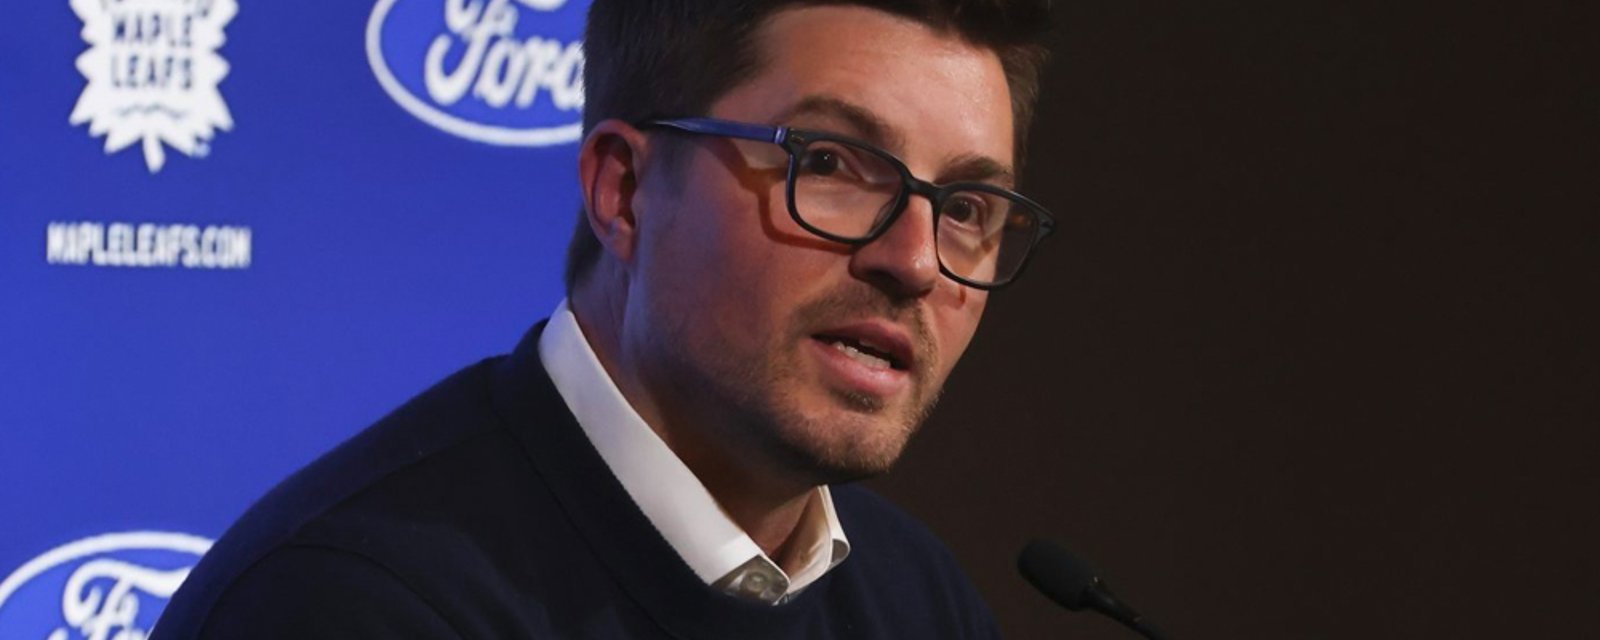 Kyle Dubas fires back at Leafs, makes a public statement of his own